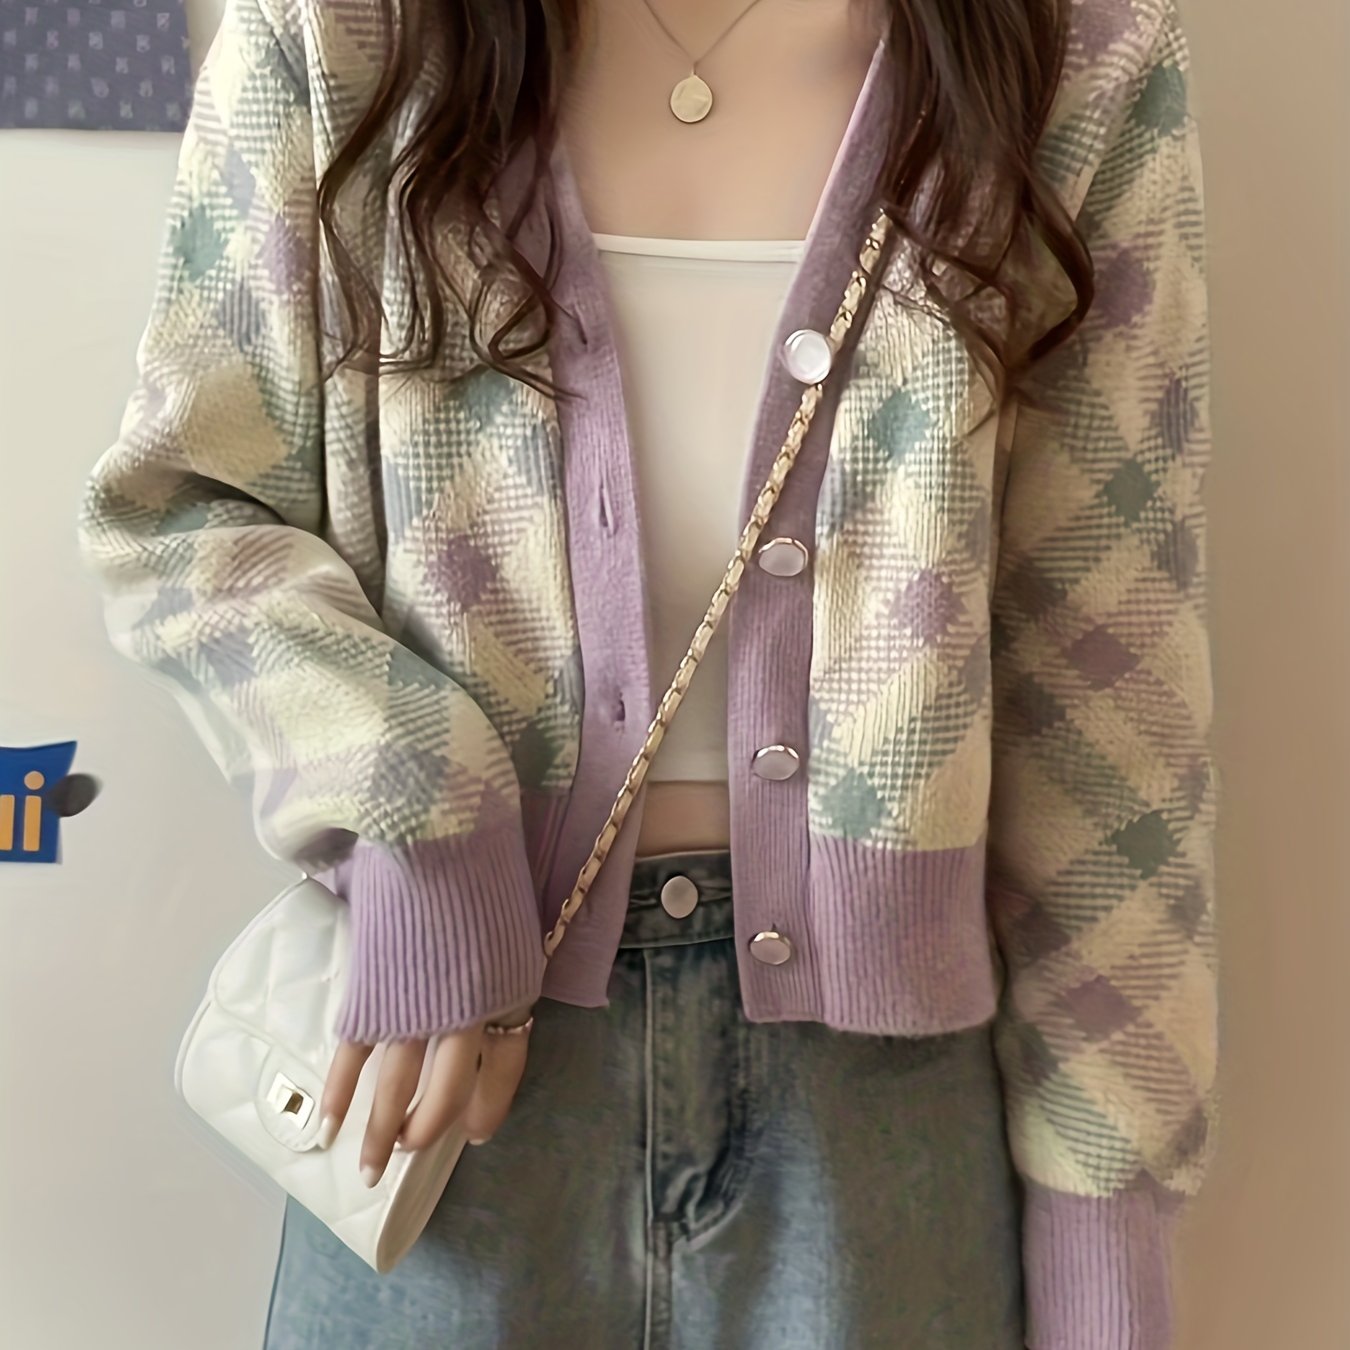 Antmvs Plaid Button Down Knit Cardigan, Casual V Neck Long Sleeve Sweater, Women's Clothing